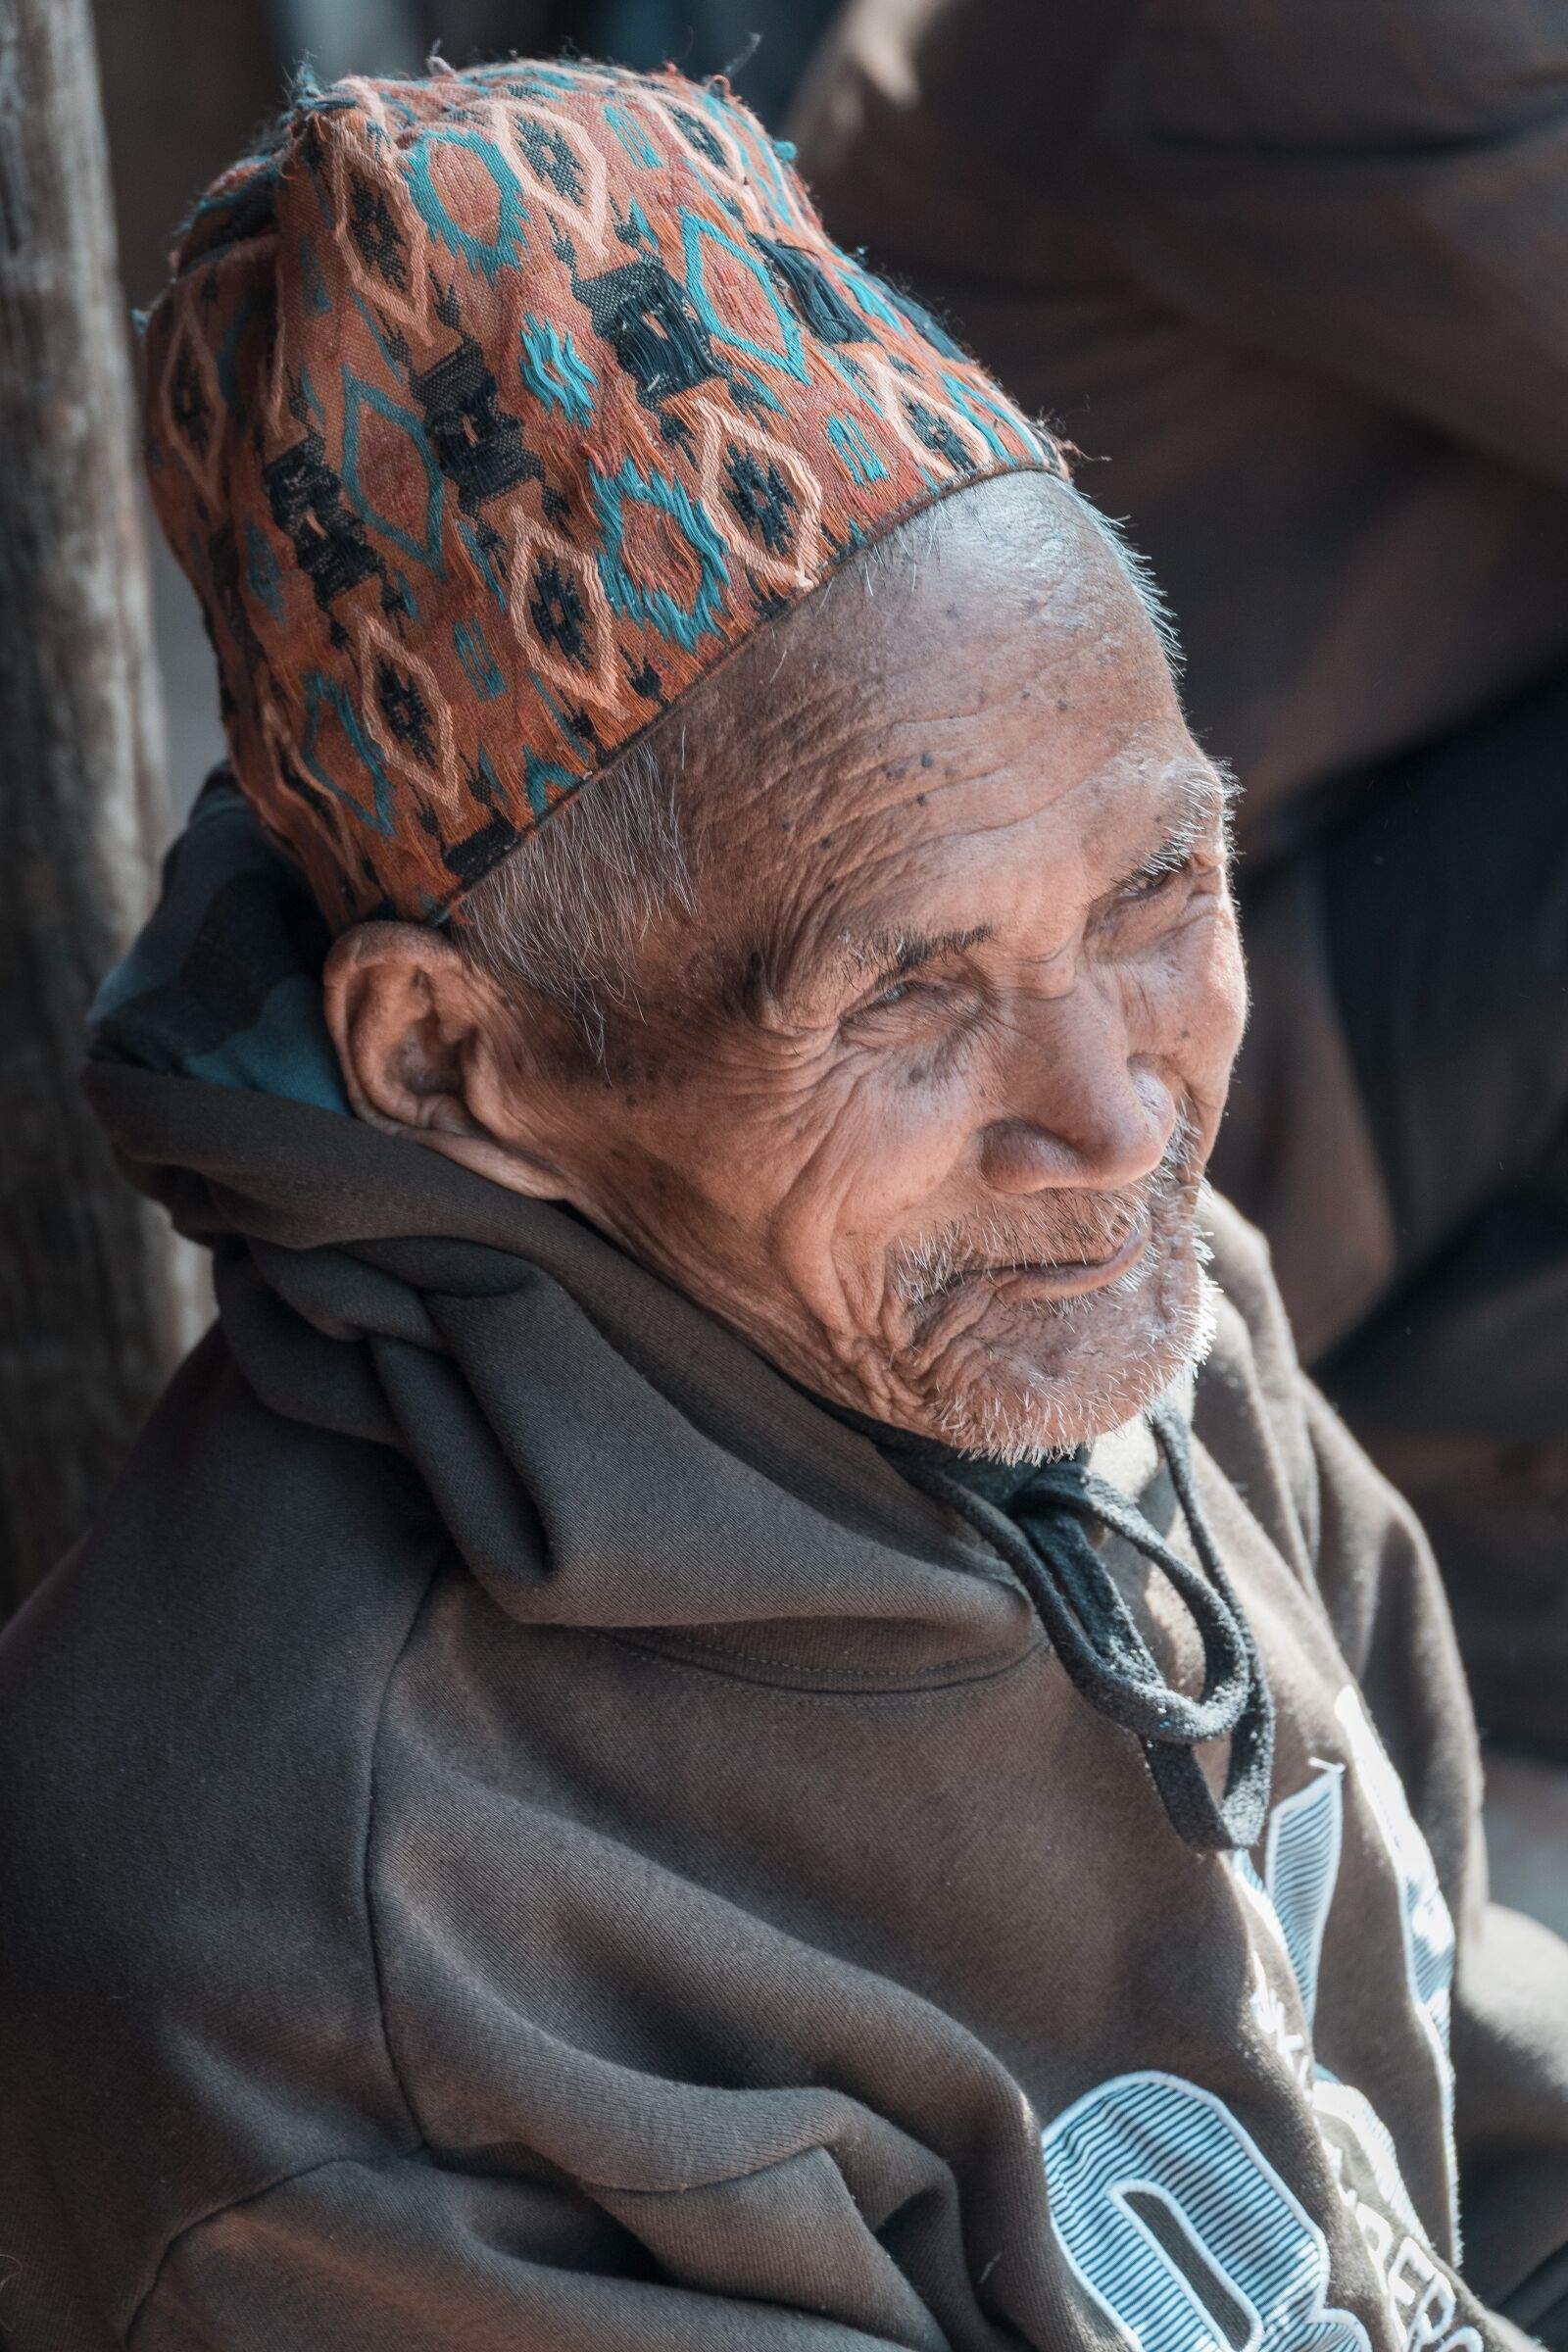 Sony a6300 sample photo. Nepal, old man, simple photography